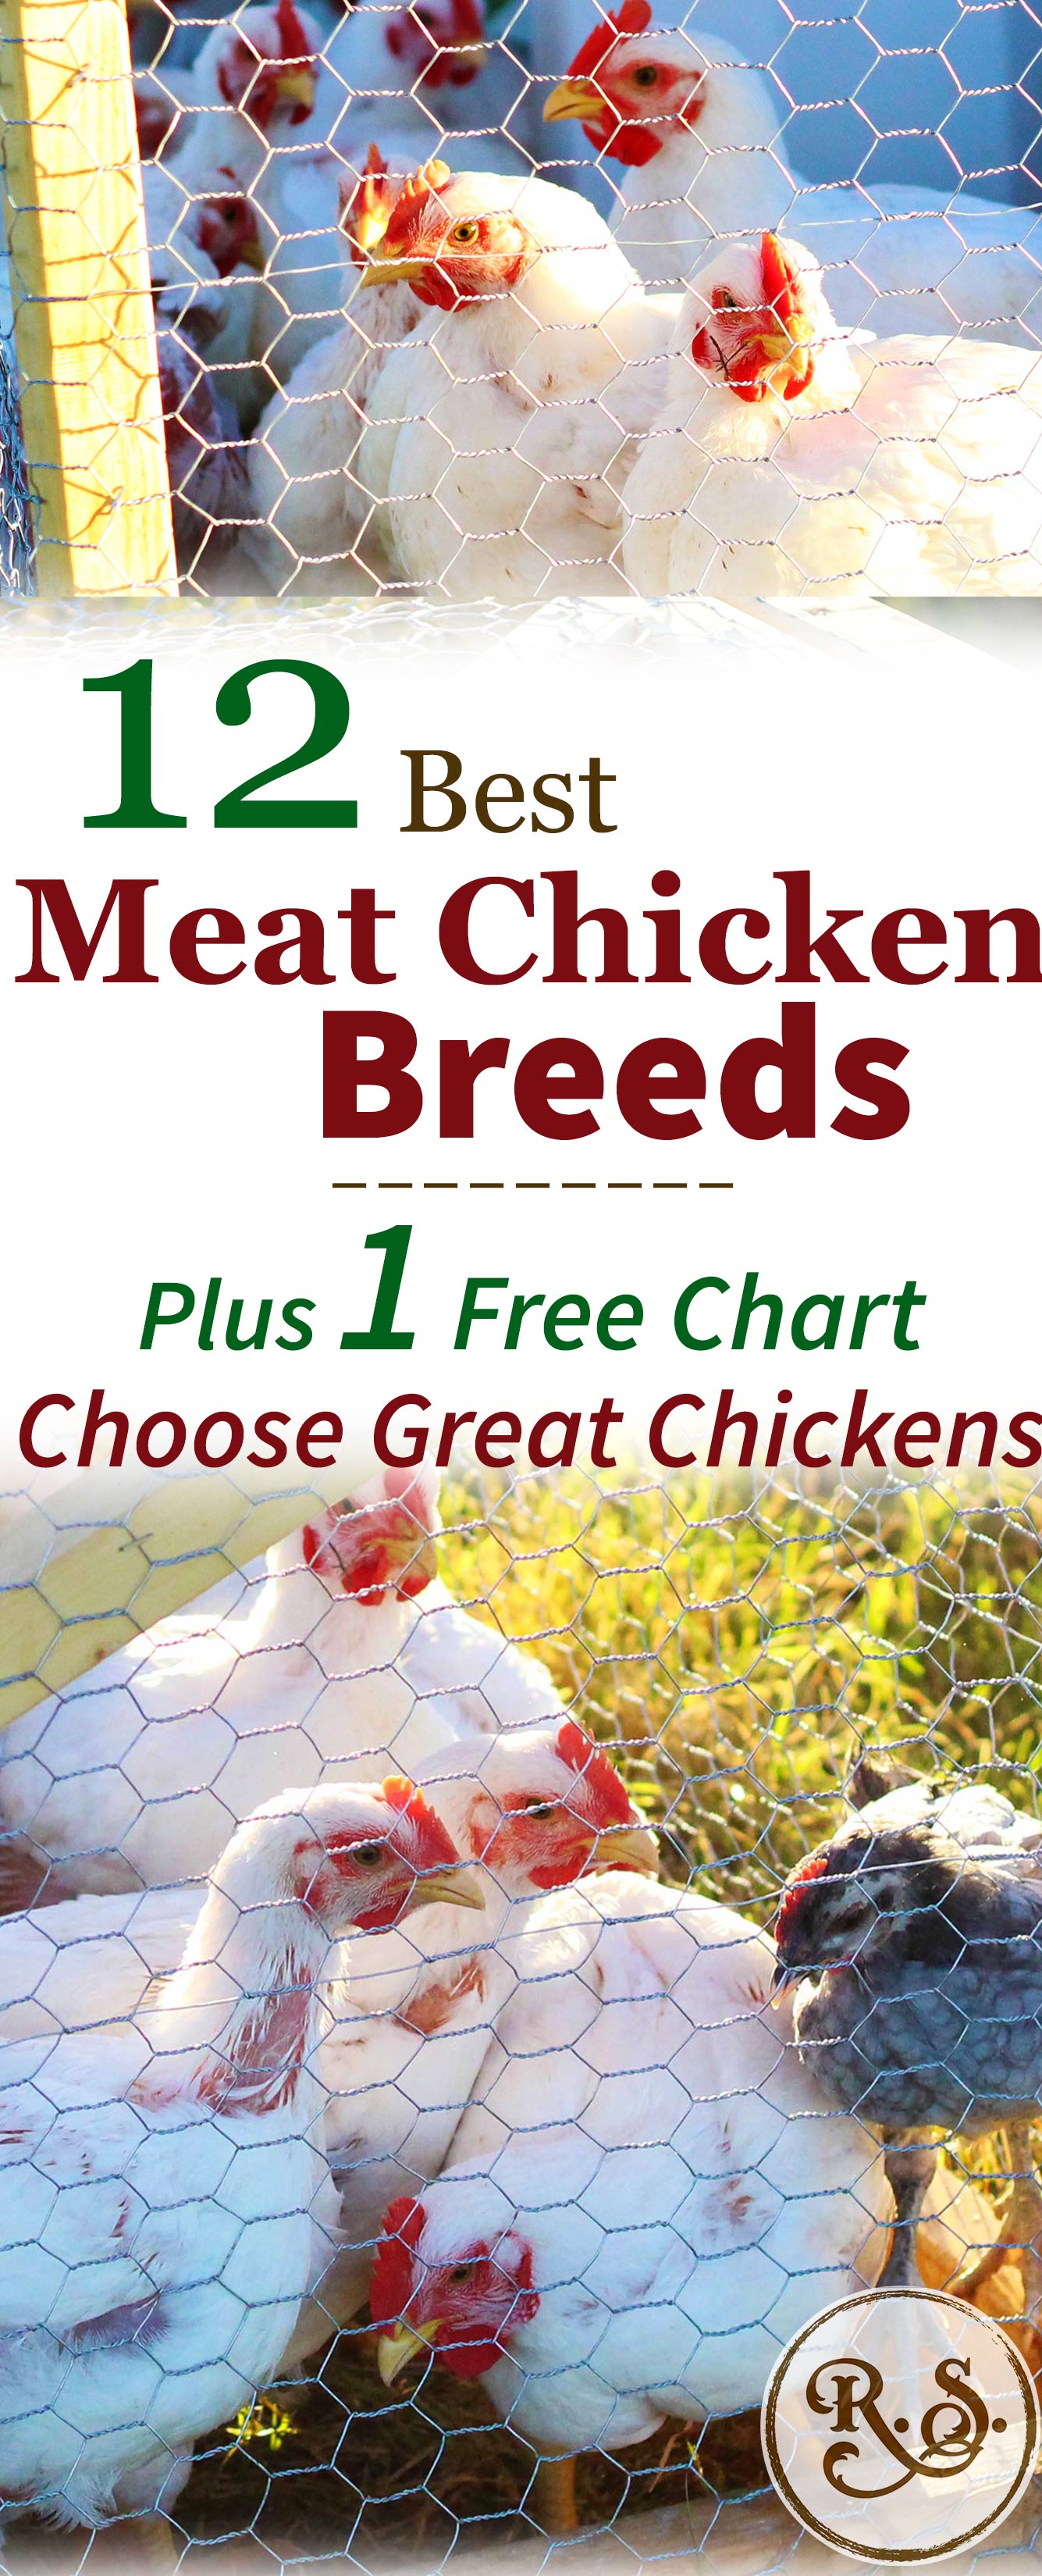 Here are 12 of the best meat chicken breeds for raising on your homestead. A great list for beginners who are looking to raise broilers. Both cross-bred & heritage breeds are compared here.